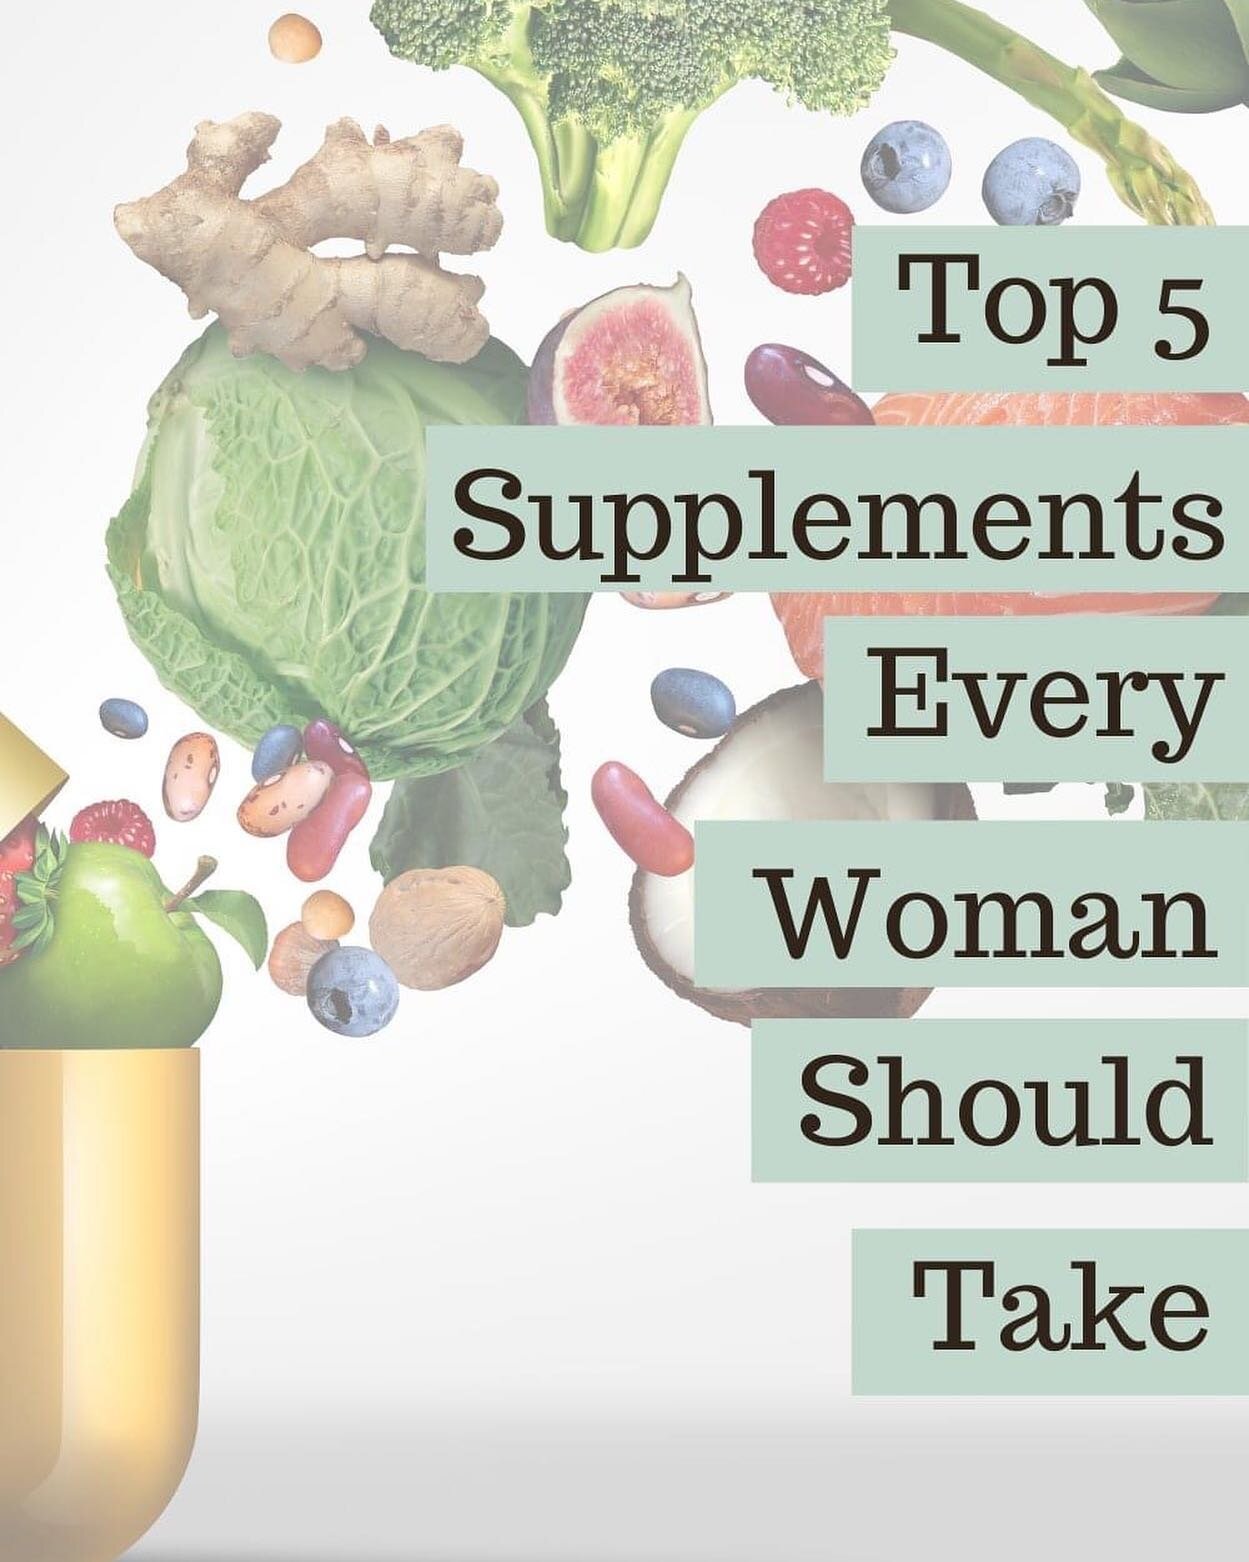 Food is just not the same as it user to be.  Farming practices, pesticides and modern day stress gets in the way of maximizing nutrition through food alone.
.
It's time to up your supplement protocol!  Read about the top 5 supplements every woman sho